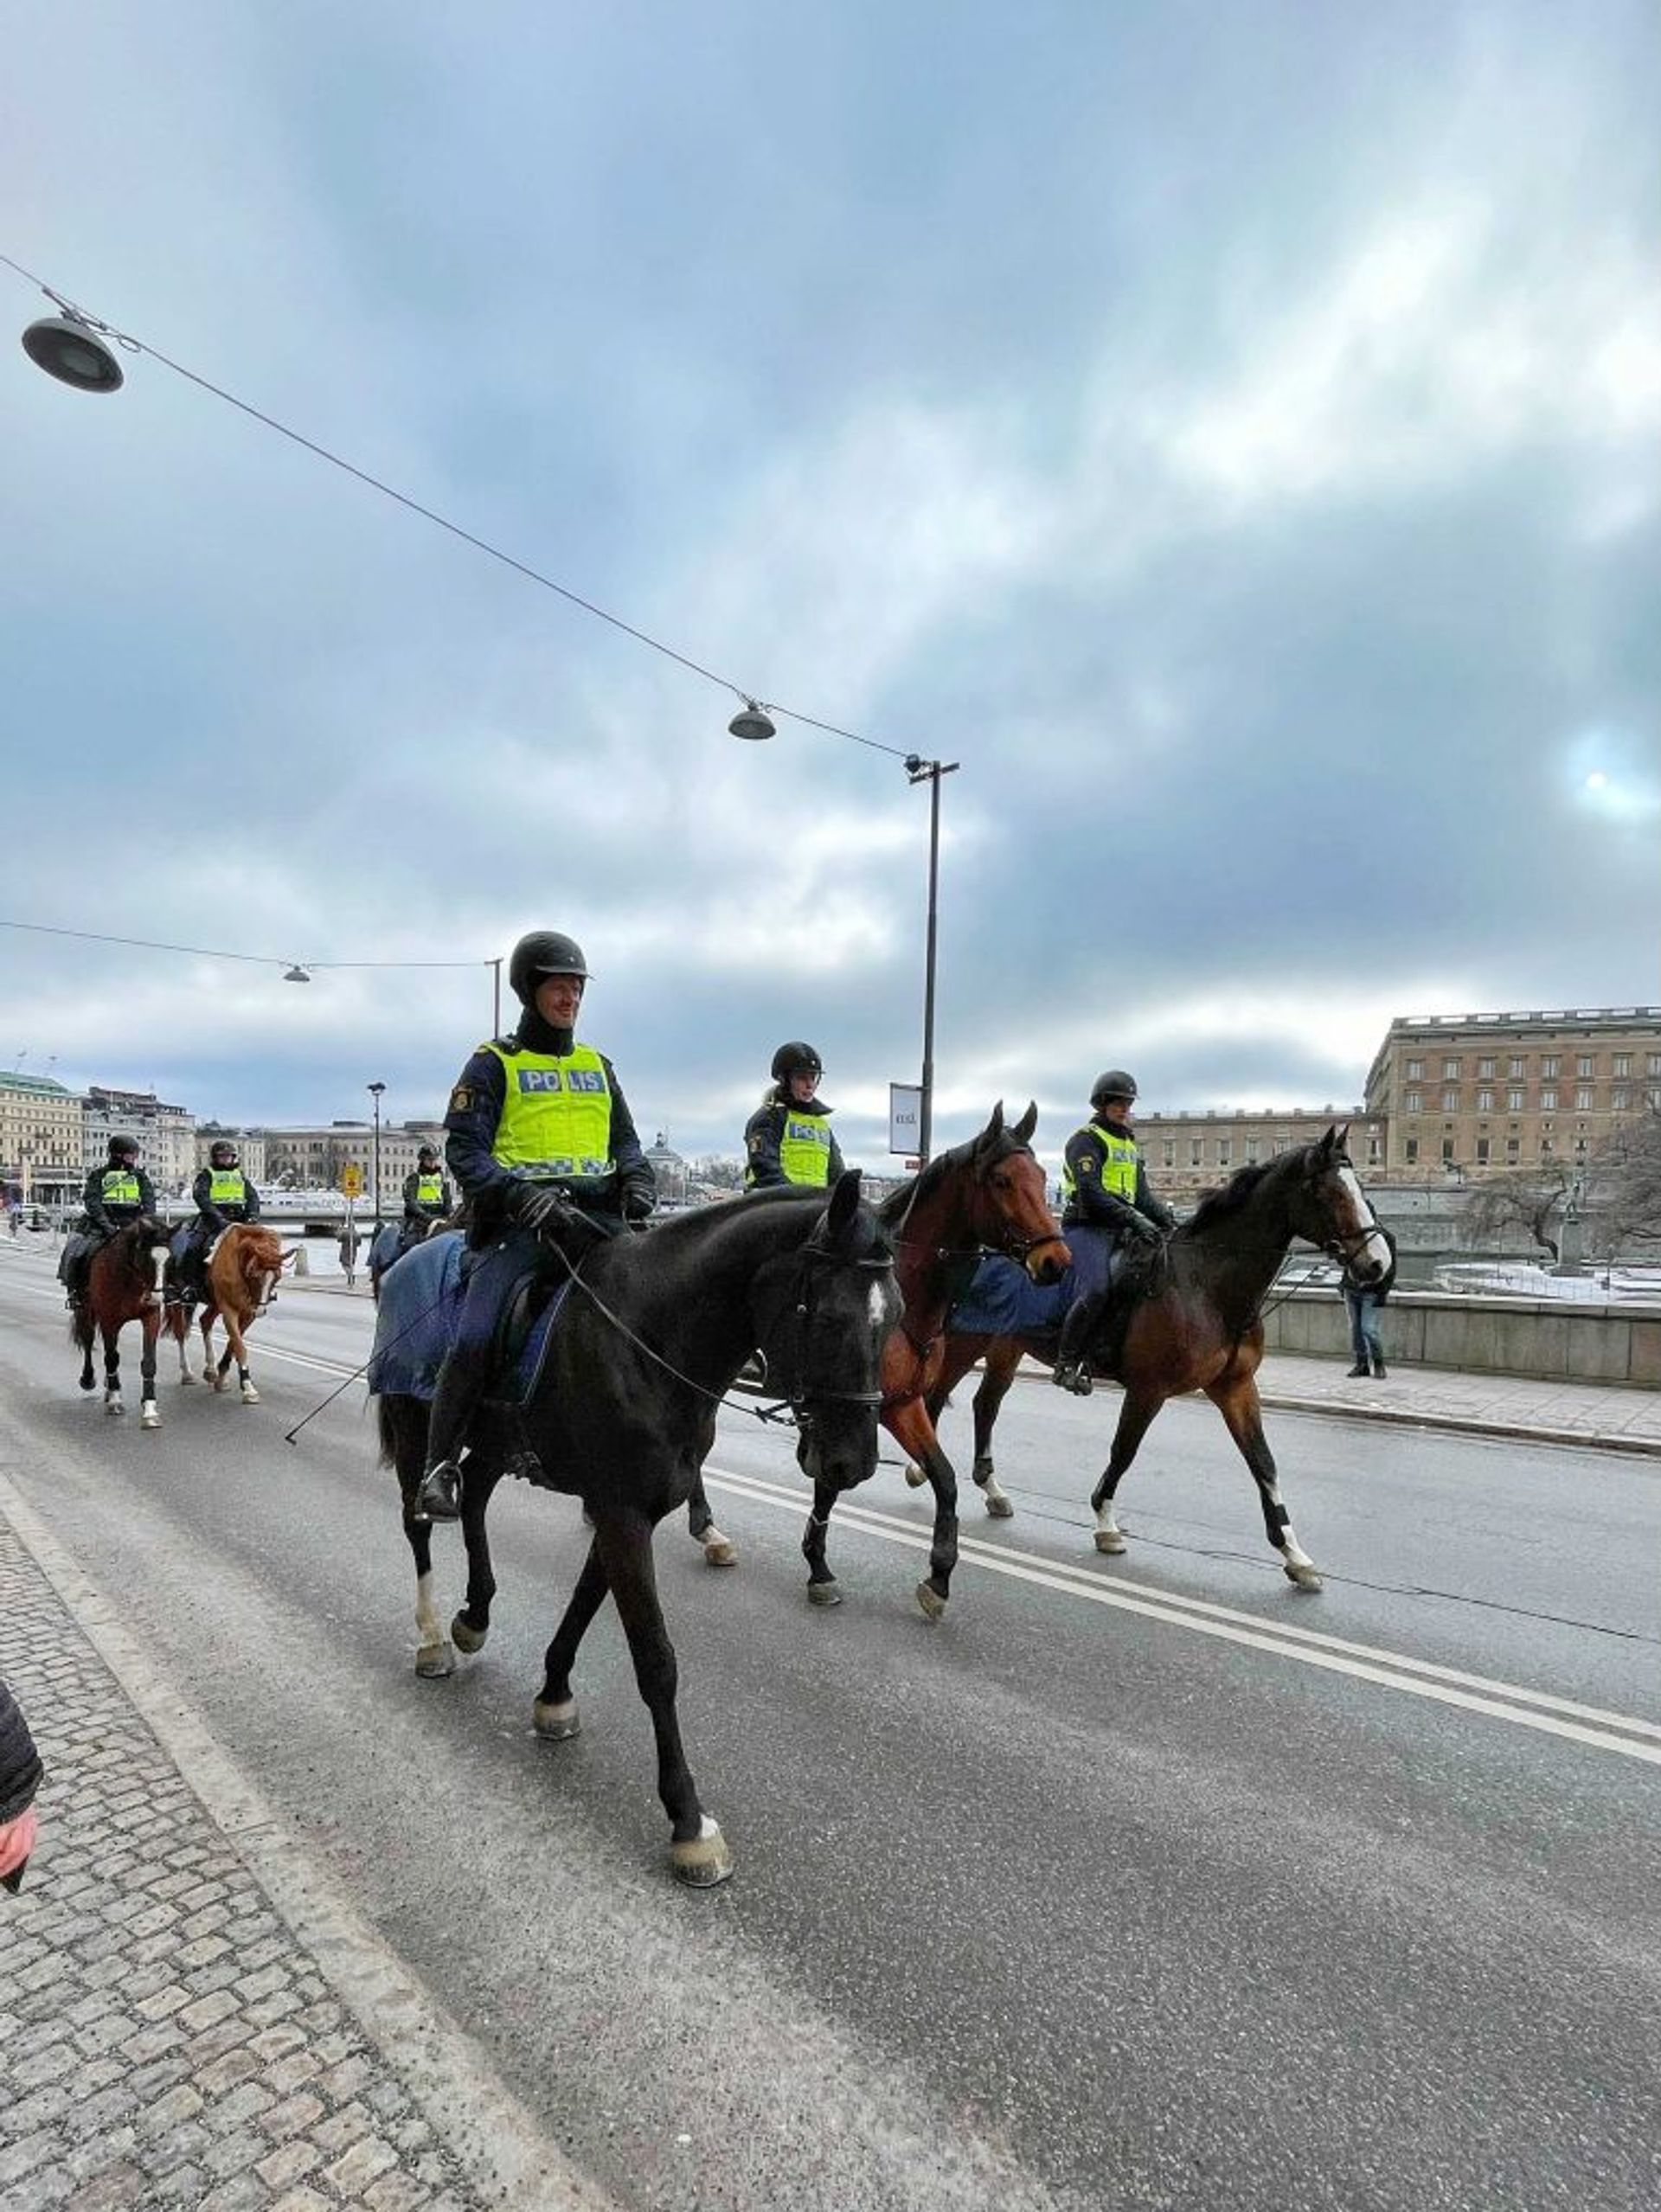 Police officers on horses in the city.